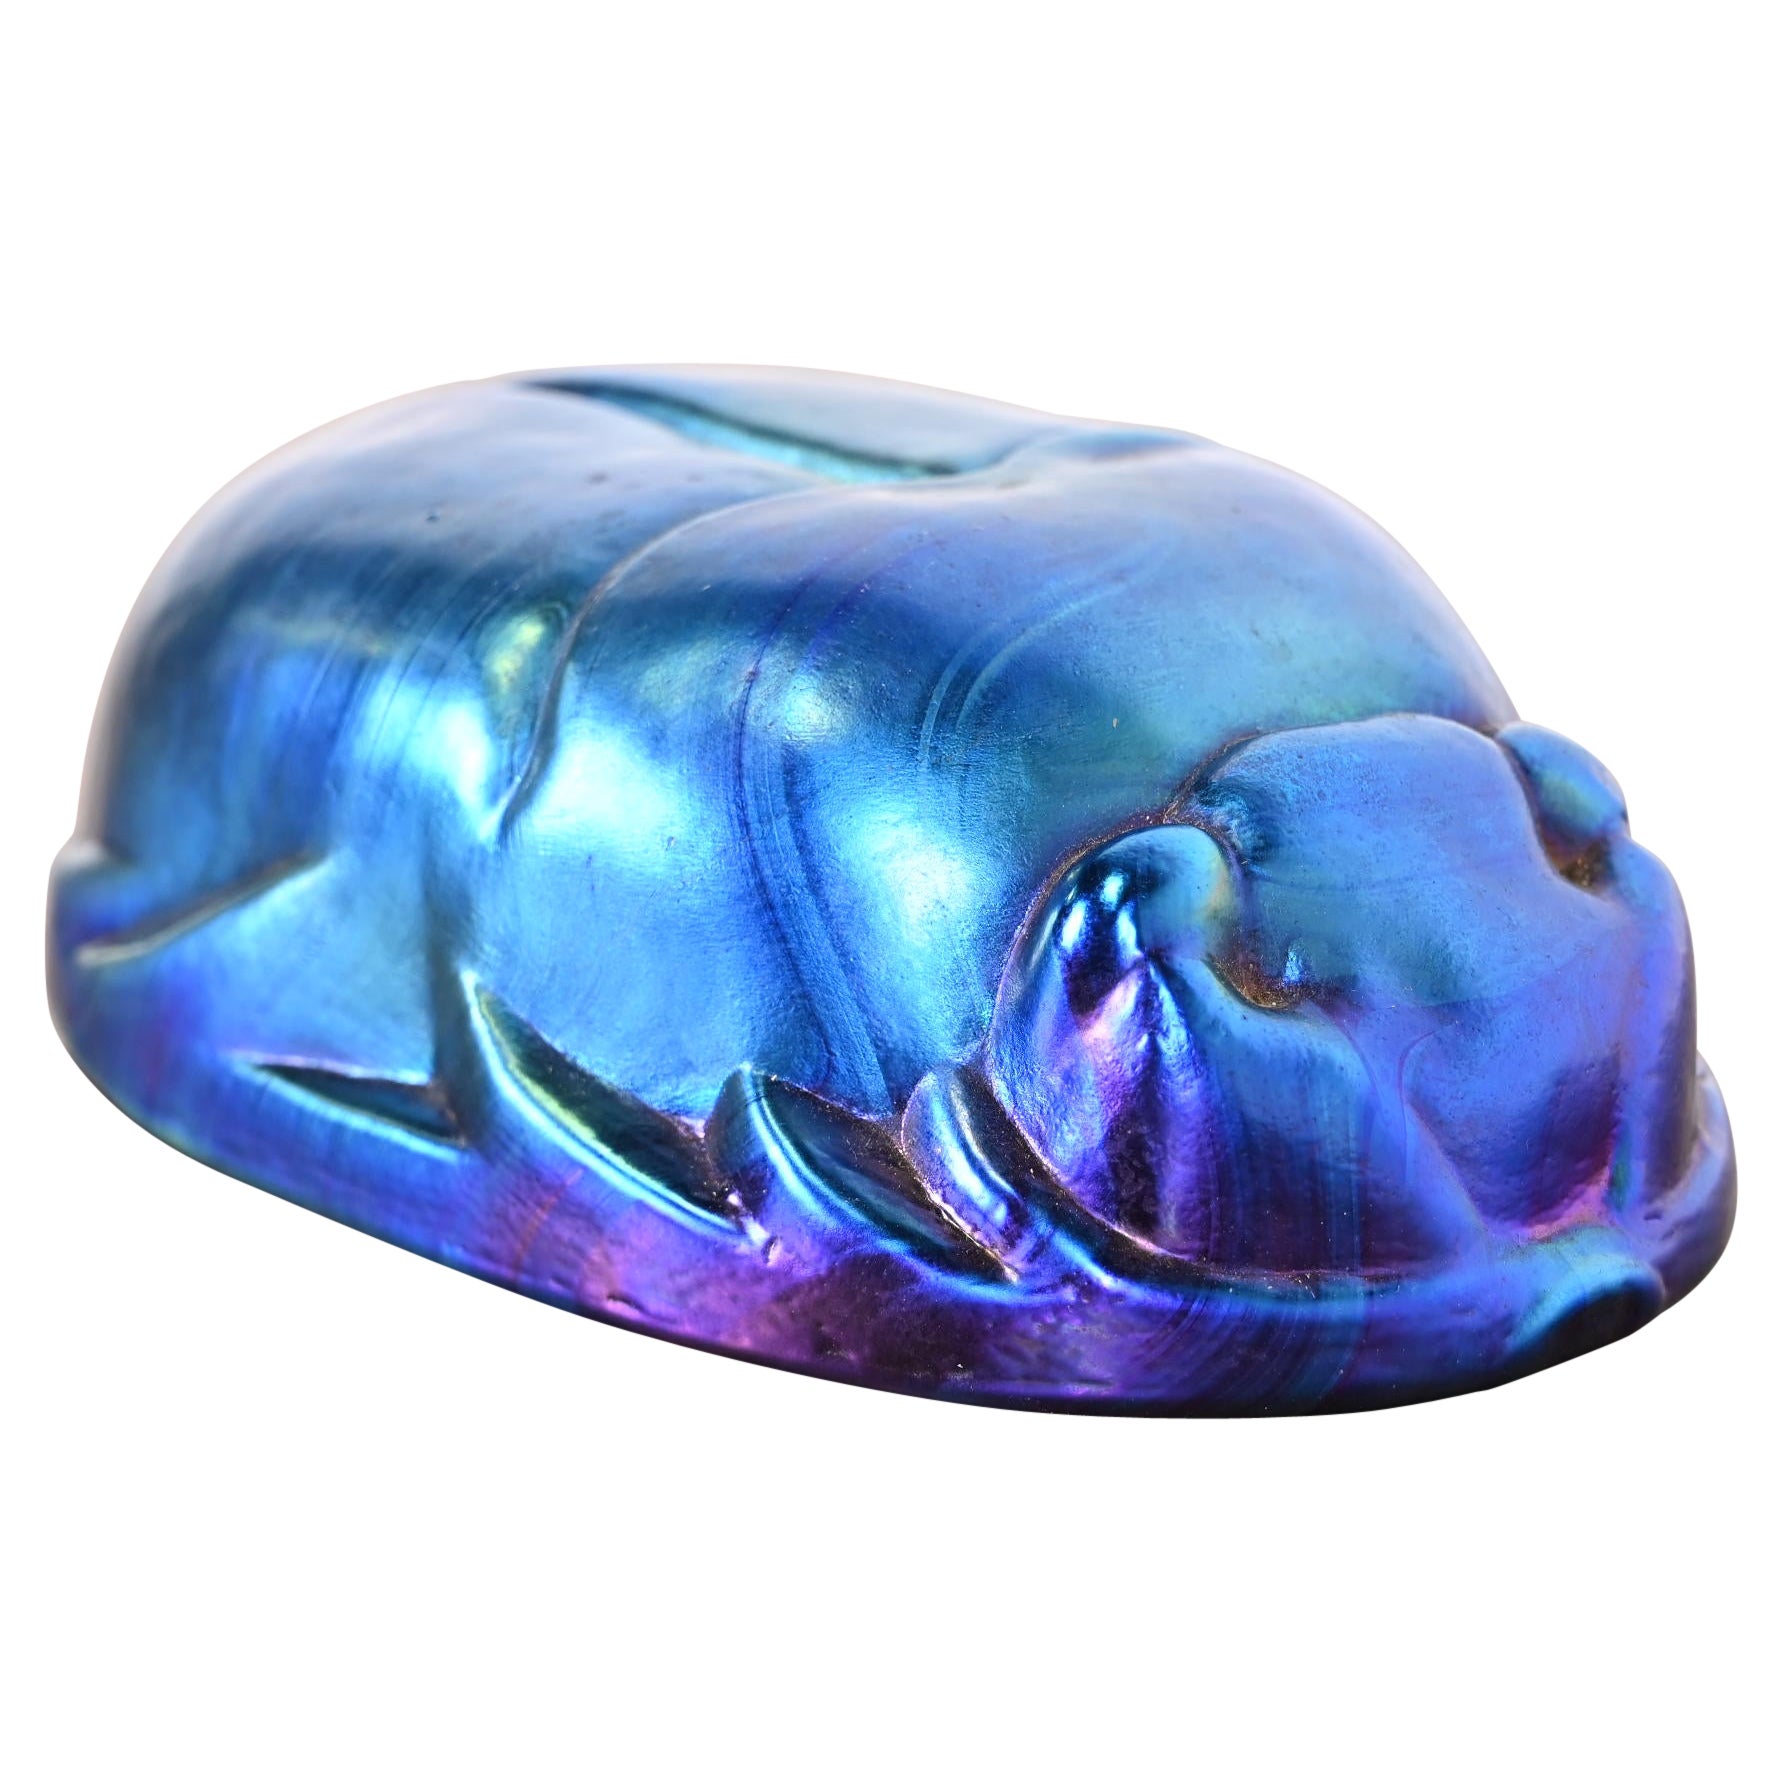 Tiffany Studios Style Iridescent Favrile Glass Scarab Paperweight For Sale